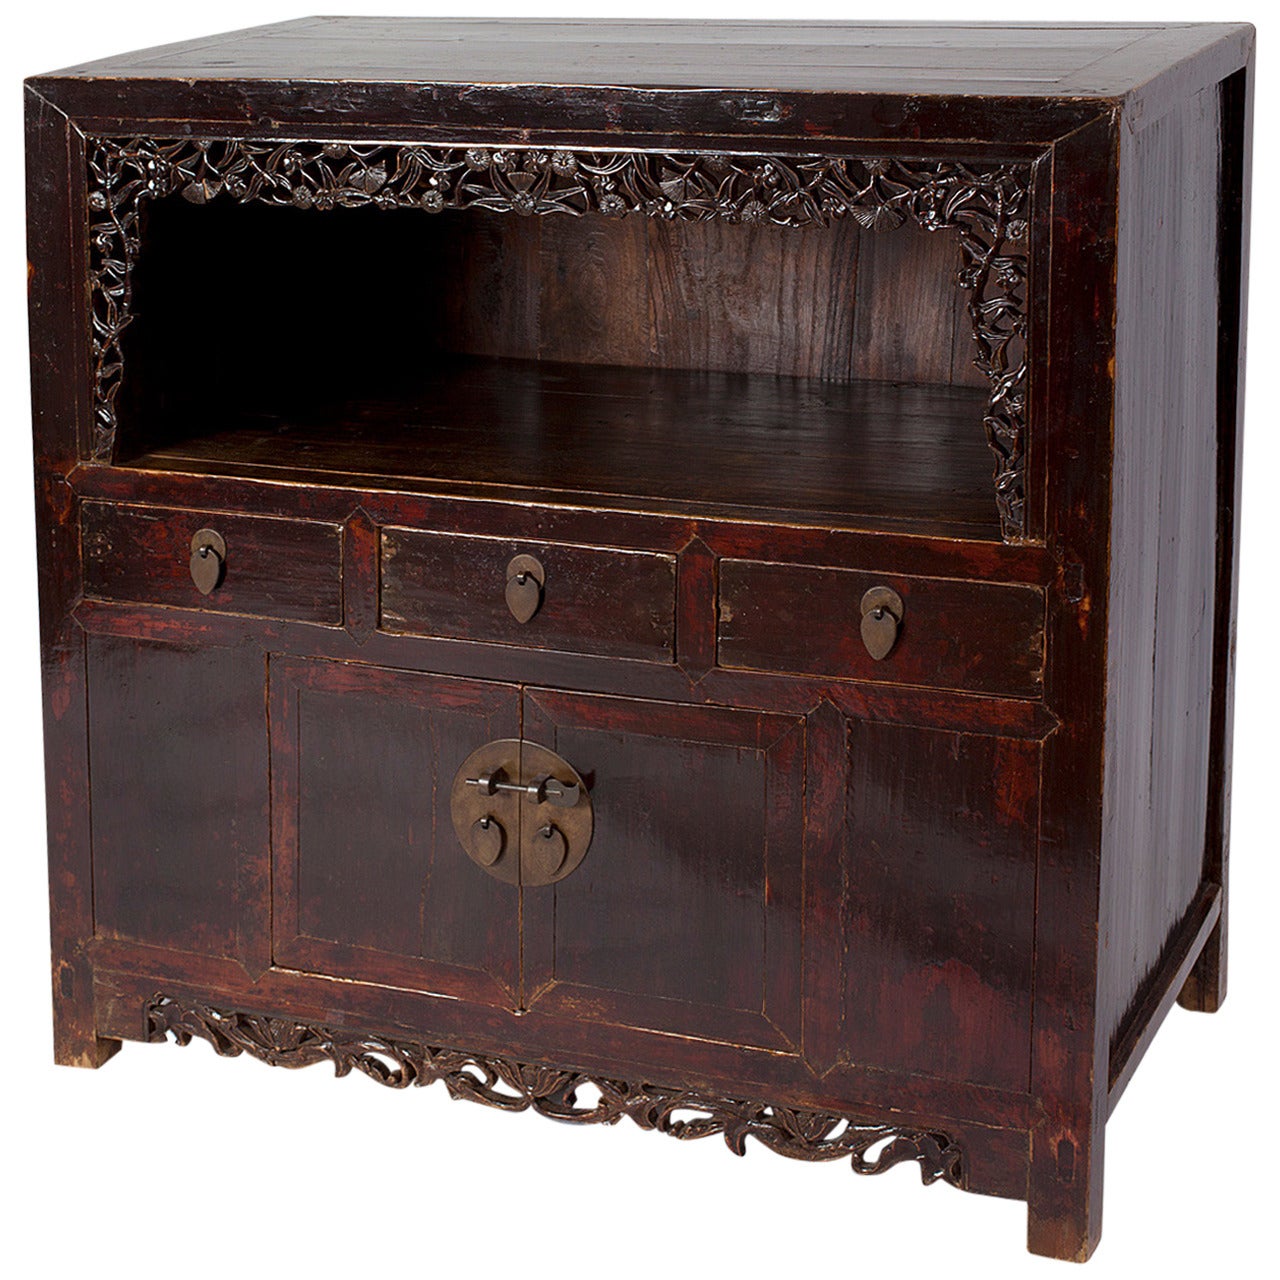 Charming antique Chinese Elm Wood Low Kang Cabinet with Carving For Sale